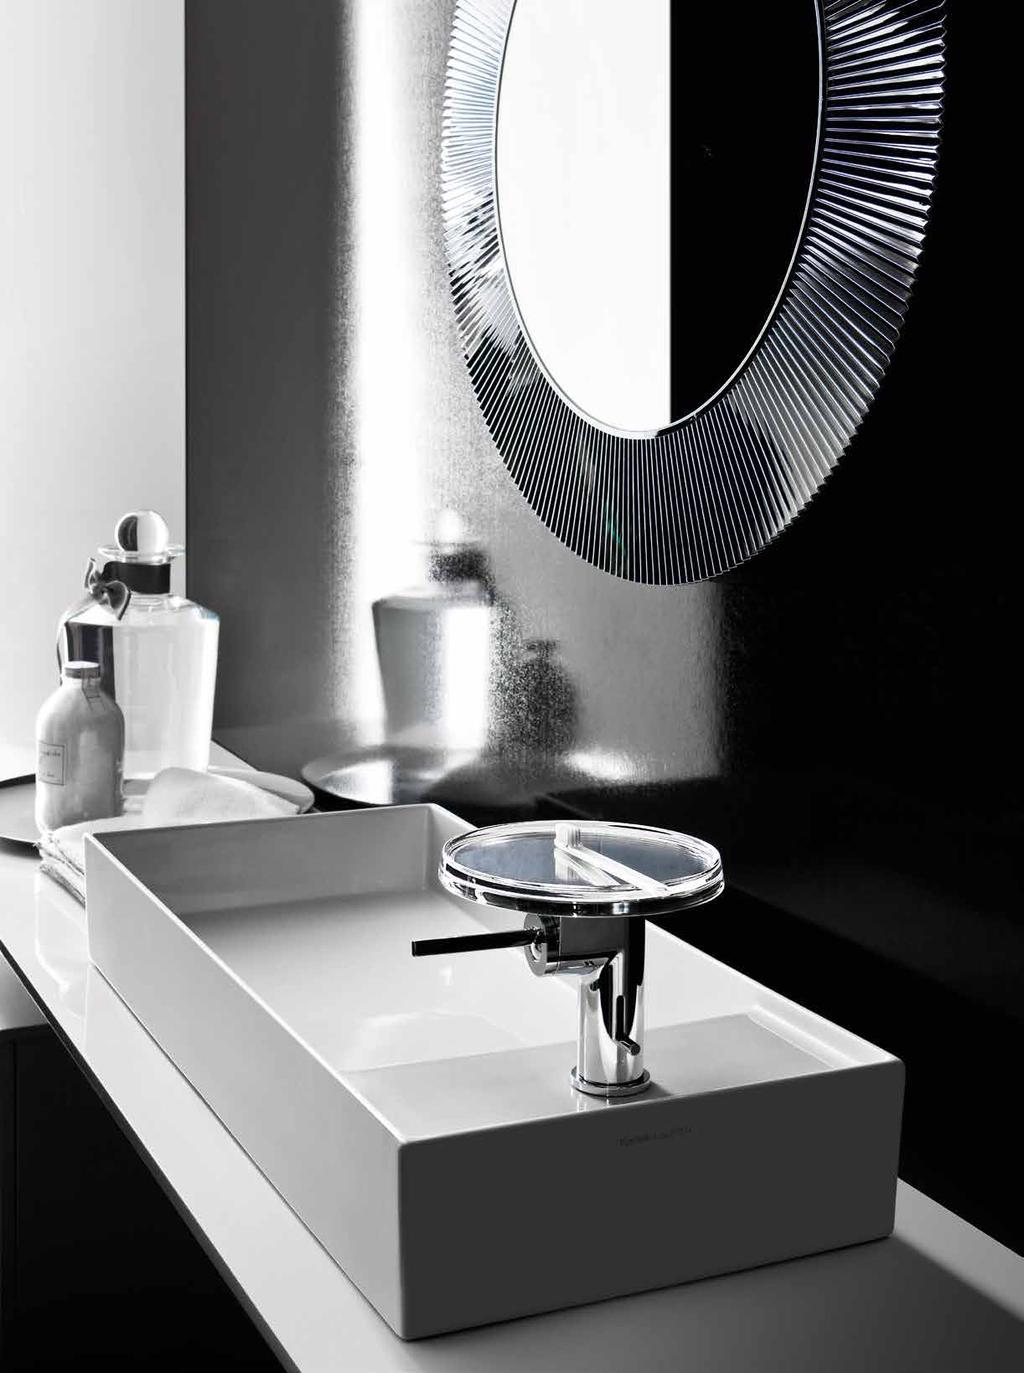 BASINS ARE NOT BASIC ANYMORE SaphirKeramik is an innovative material made by LAUFEN to defy the conventions of Sanitaryware design.